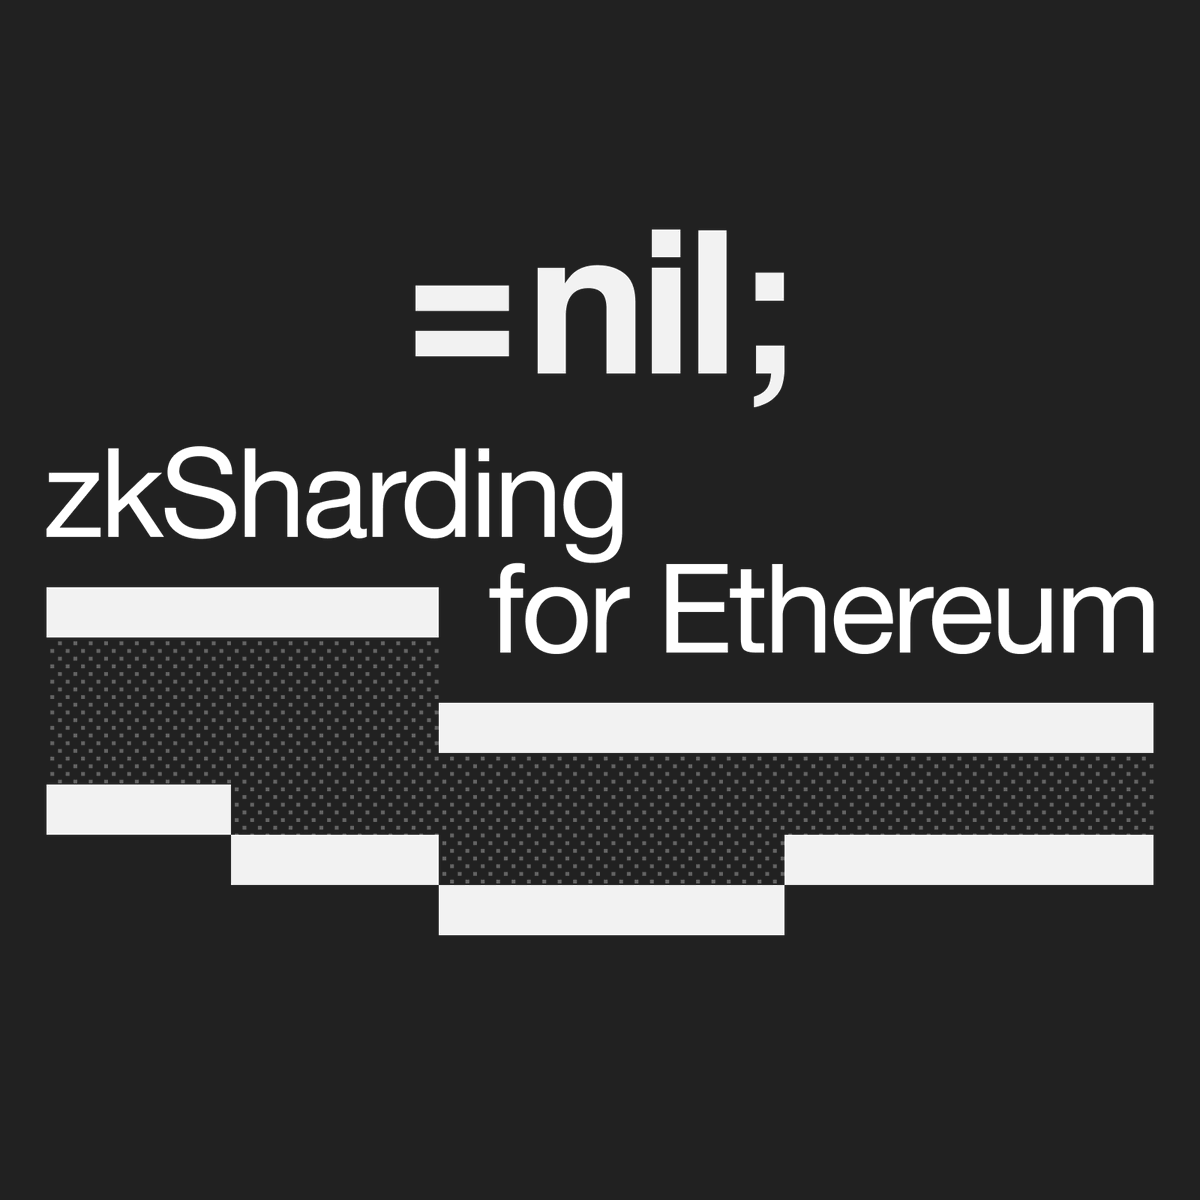 1/ Introducing =nil; - a zkRollup that securely scales Ethereum to 60,000+ TPS through zkSharding. It takes modular and monolithic architecture advantages for scaling as it maintains unified liquidity and state while achieving full composability with Ethereum. See the thread